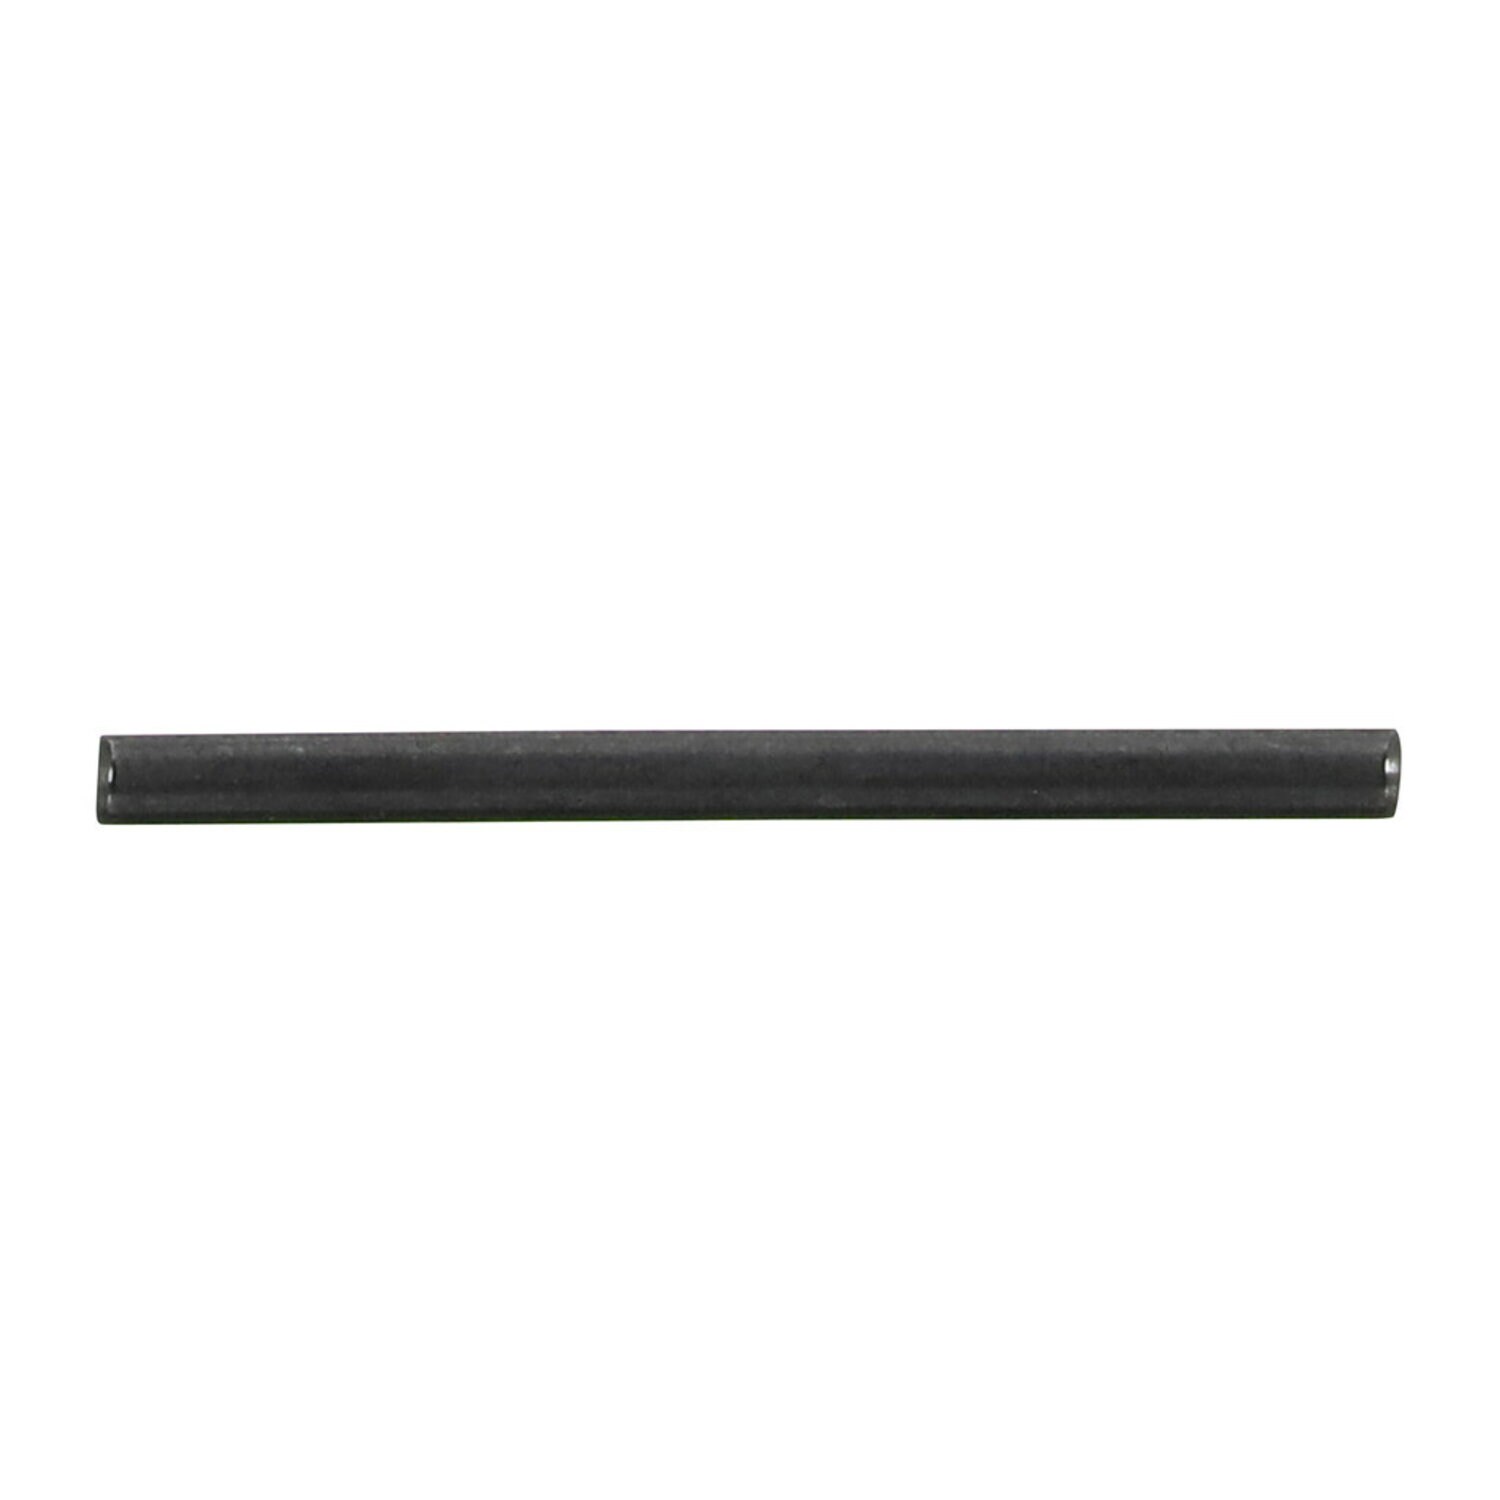 7100277546 - 3M Lever Spring Pin, 89037